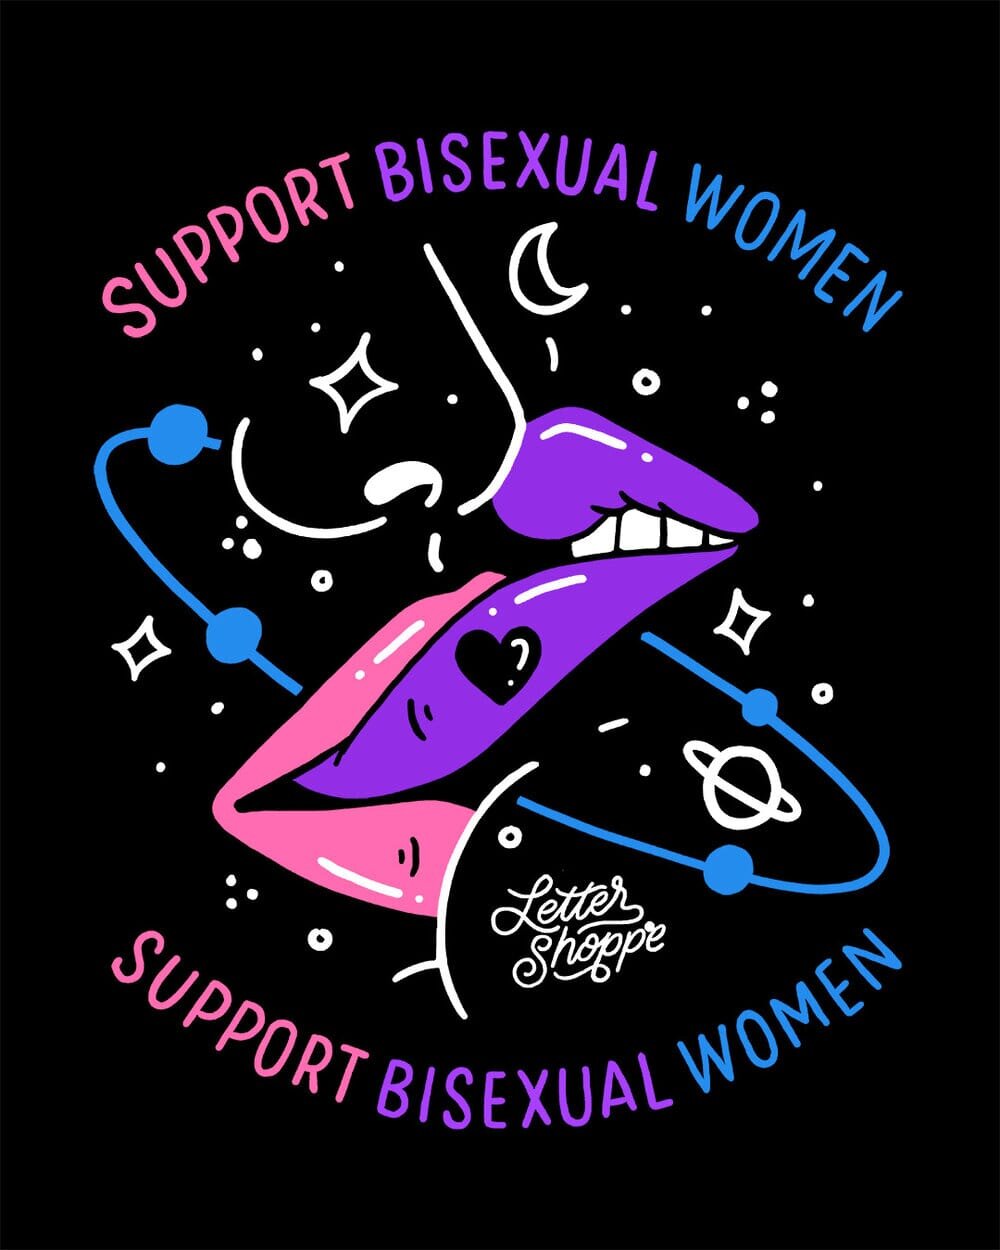 Support Bisexual Women Poster